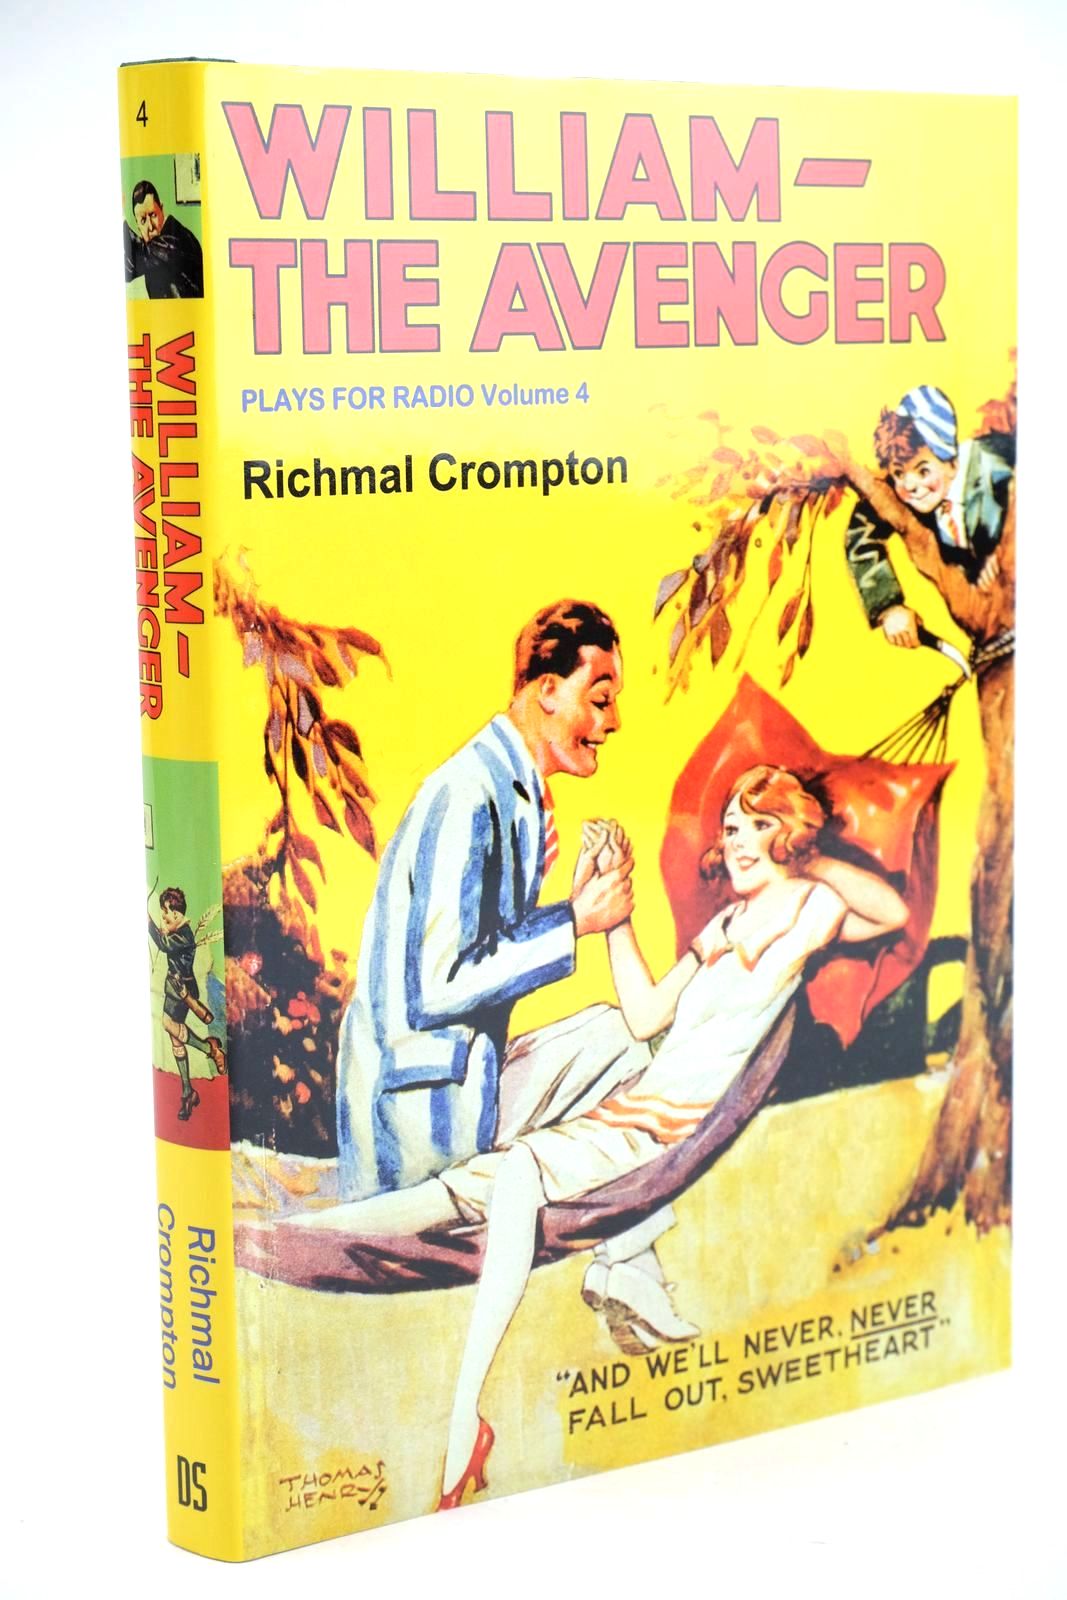 Photo of WILLIAM THE AVENGER written by Crompton, Richmal illustrated by Henry, Thomas published by David Schutte (STOCK CODE: 1324559)  for sale by Stella & Rose's Books